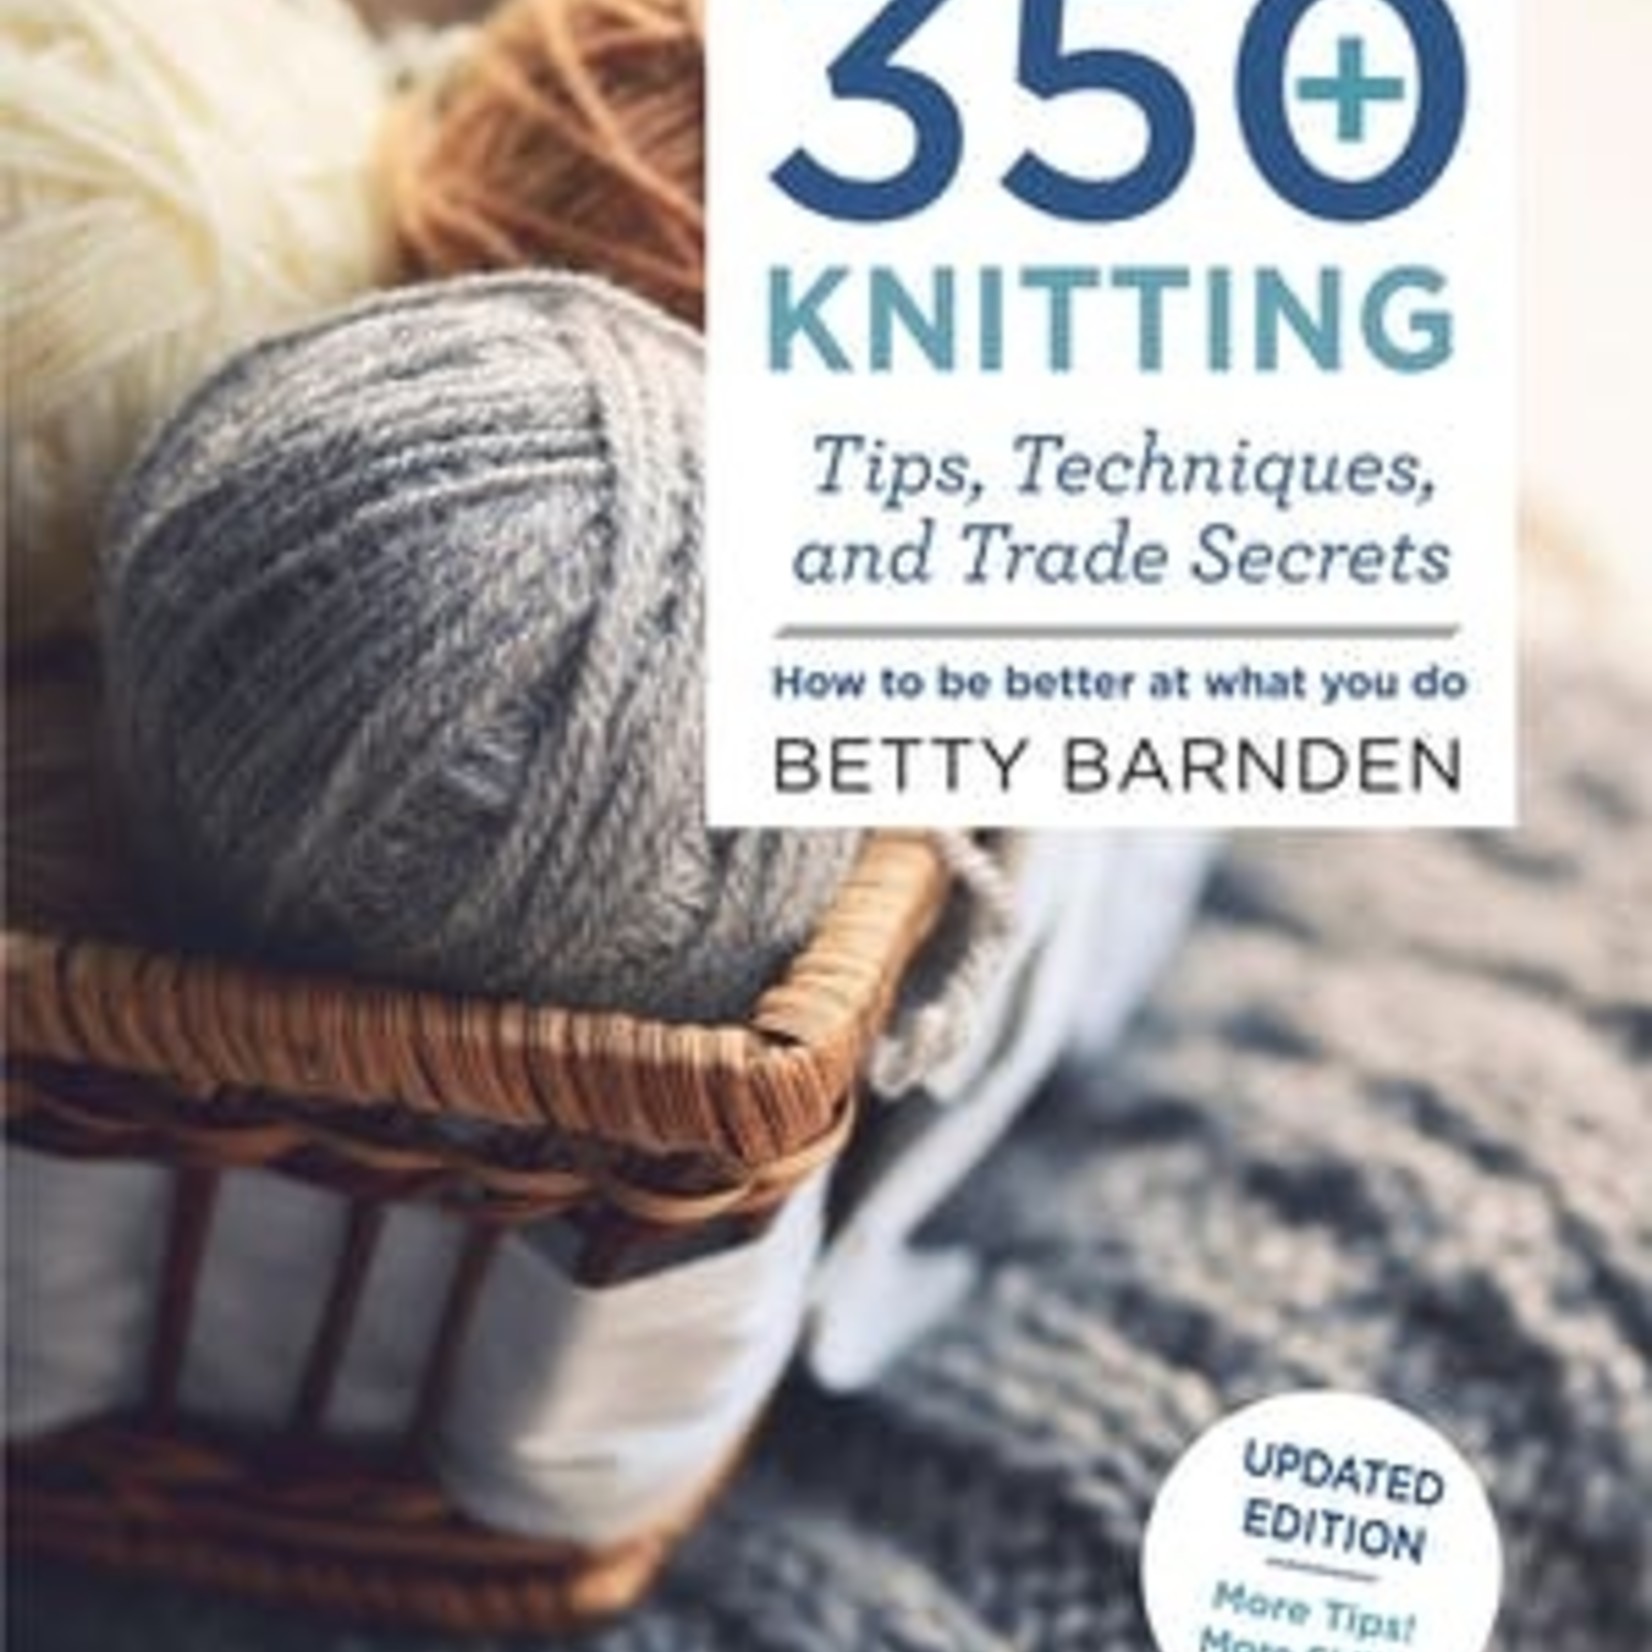 350+ Knitting Tips, Techniques, and Trade Secrets by Betty Barnden